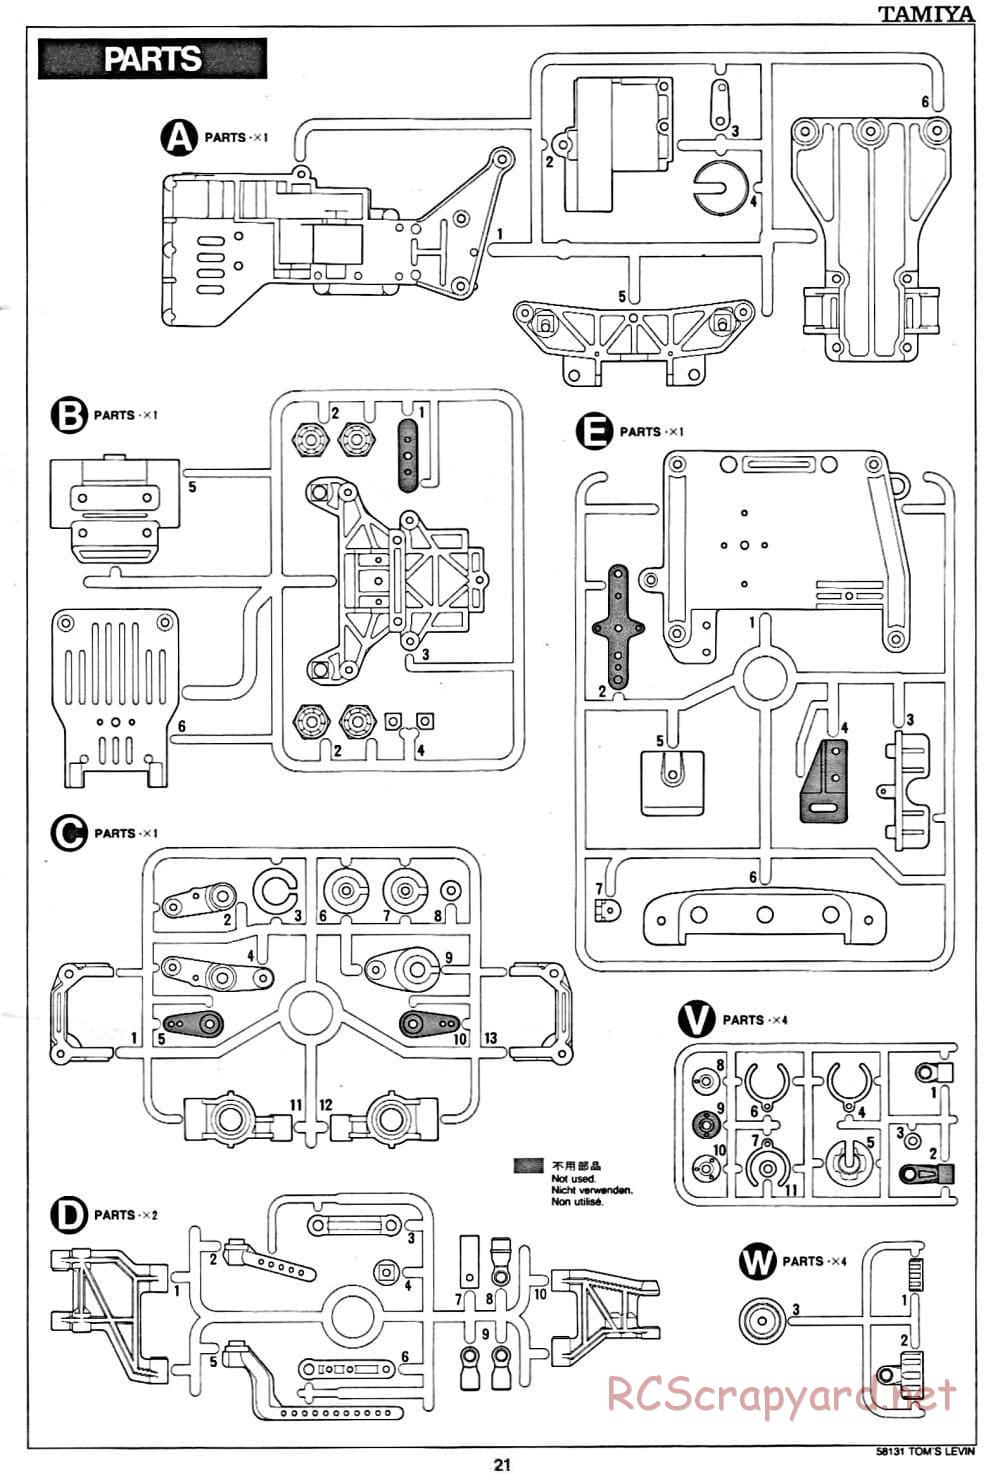 Tamiya - Toyota Tom's Levin - FF-01 Chassis - Manual - Page 21